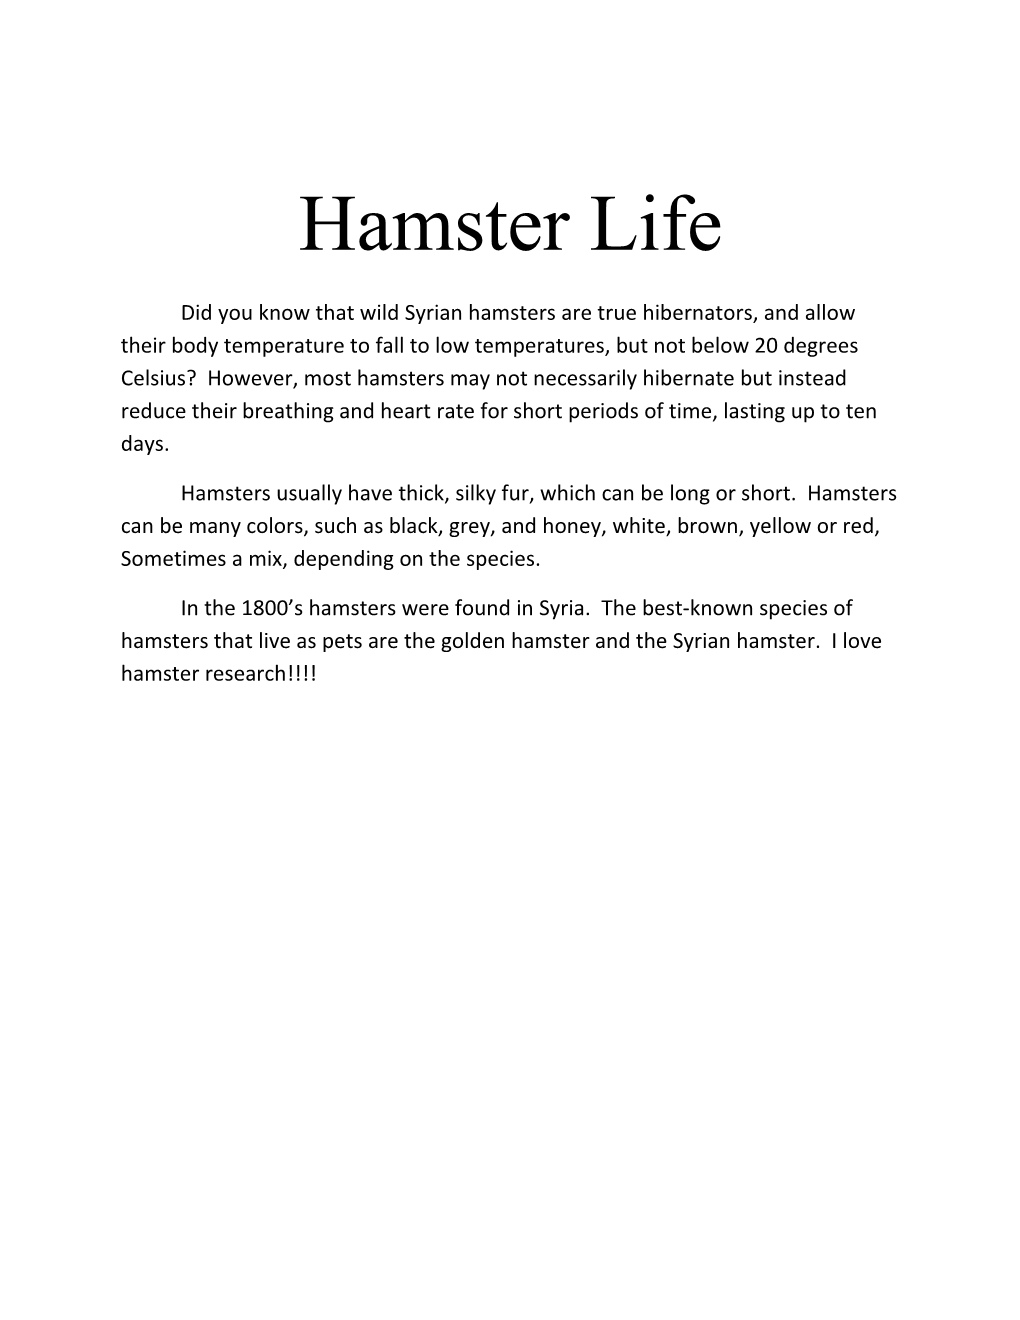 Hamsters Usually Have Thick, Silky Fur, Which Can Be Long Or Short. Hamsters Can Be Many